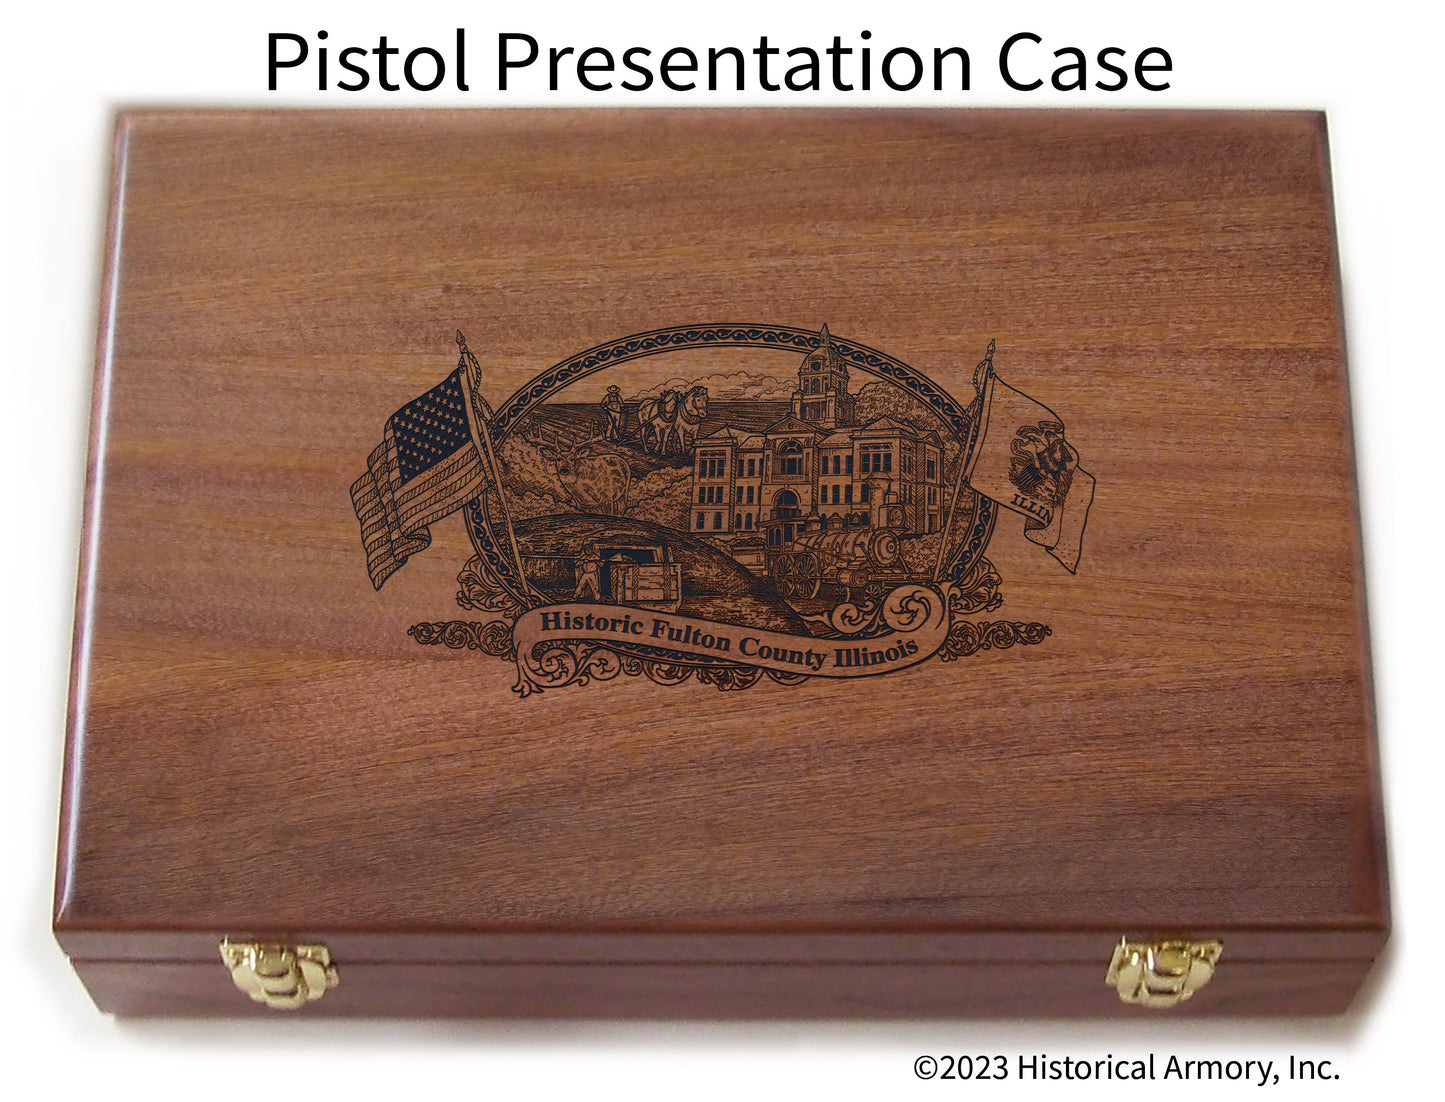 Fulton County Illinois Engraved .45 Auto Ruger 1911 Presentation Case